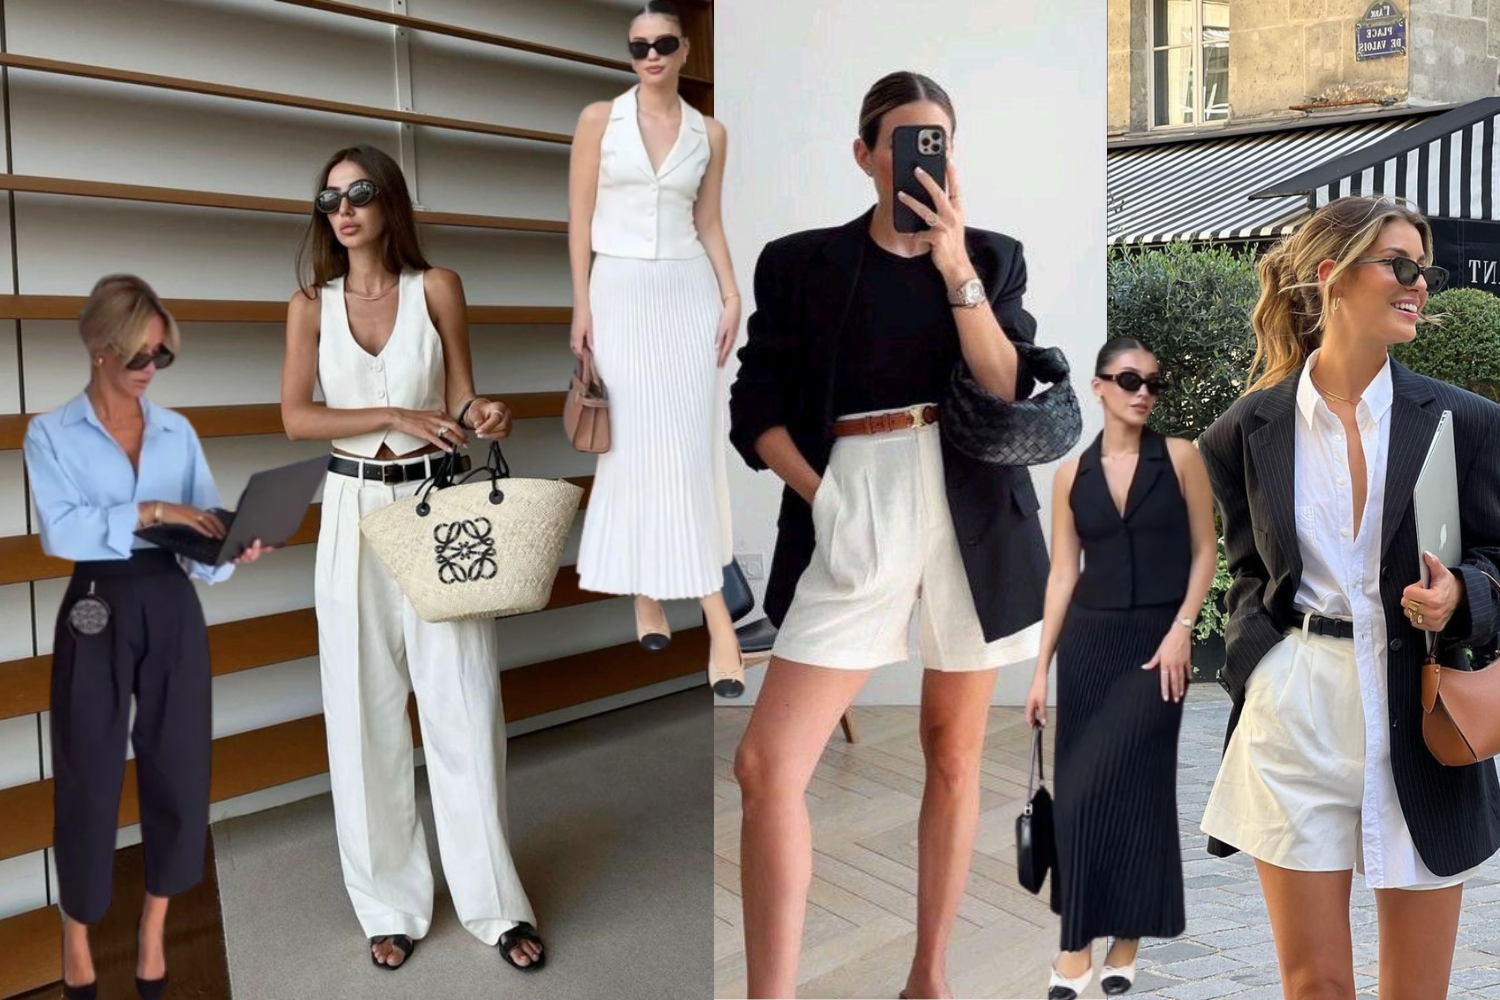 Too Hot? Here are 7 Summer Workwear Outfits You’ll Love